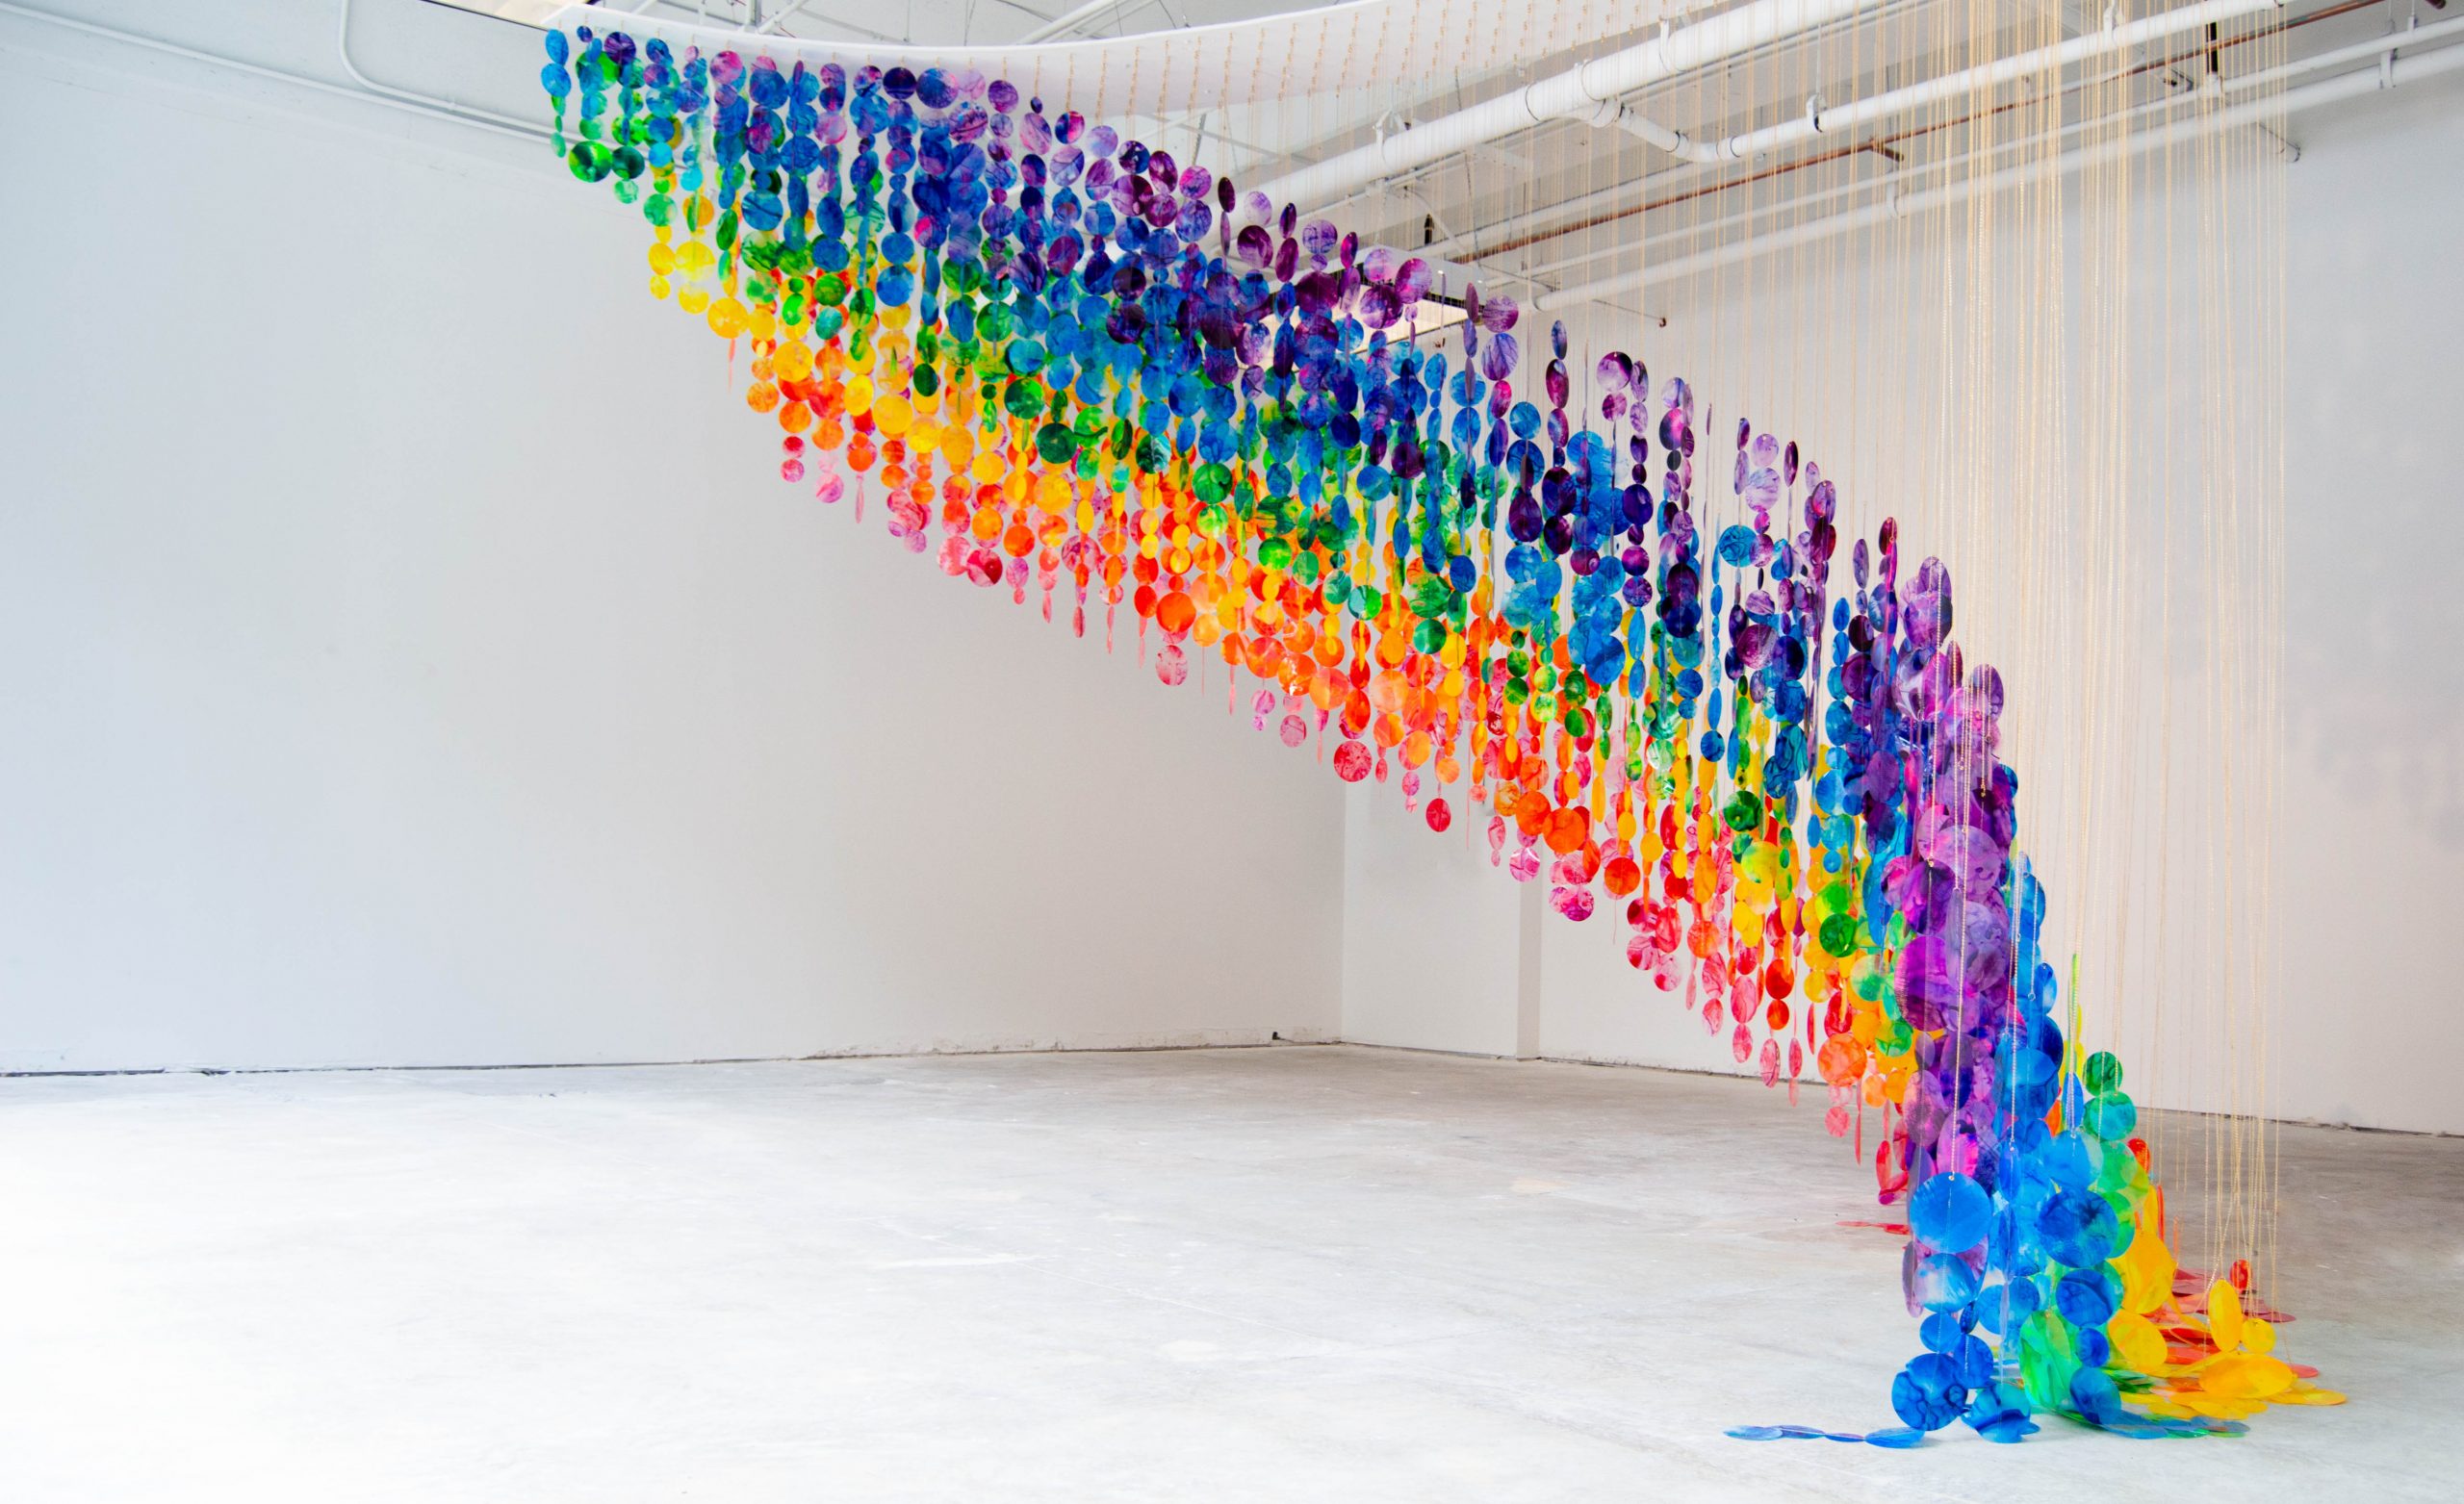 Ceiling Suspended Kinetic Rainbow Sculpture – “We Wondered If We Could Reach Its End”